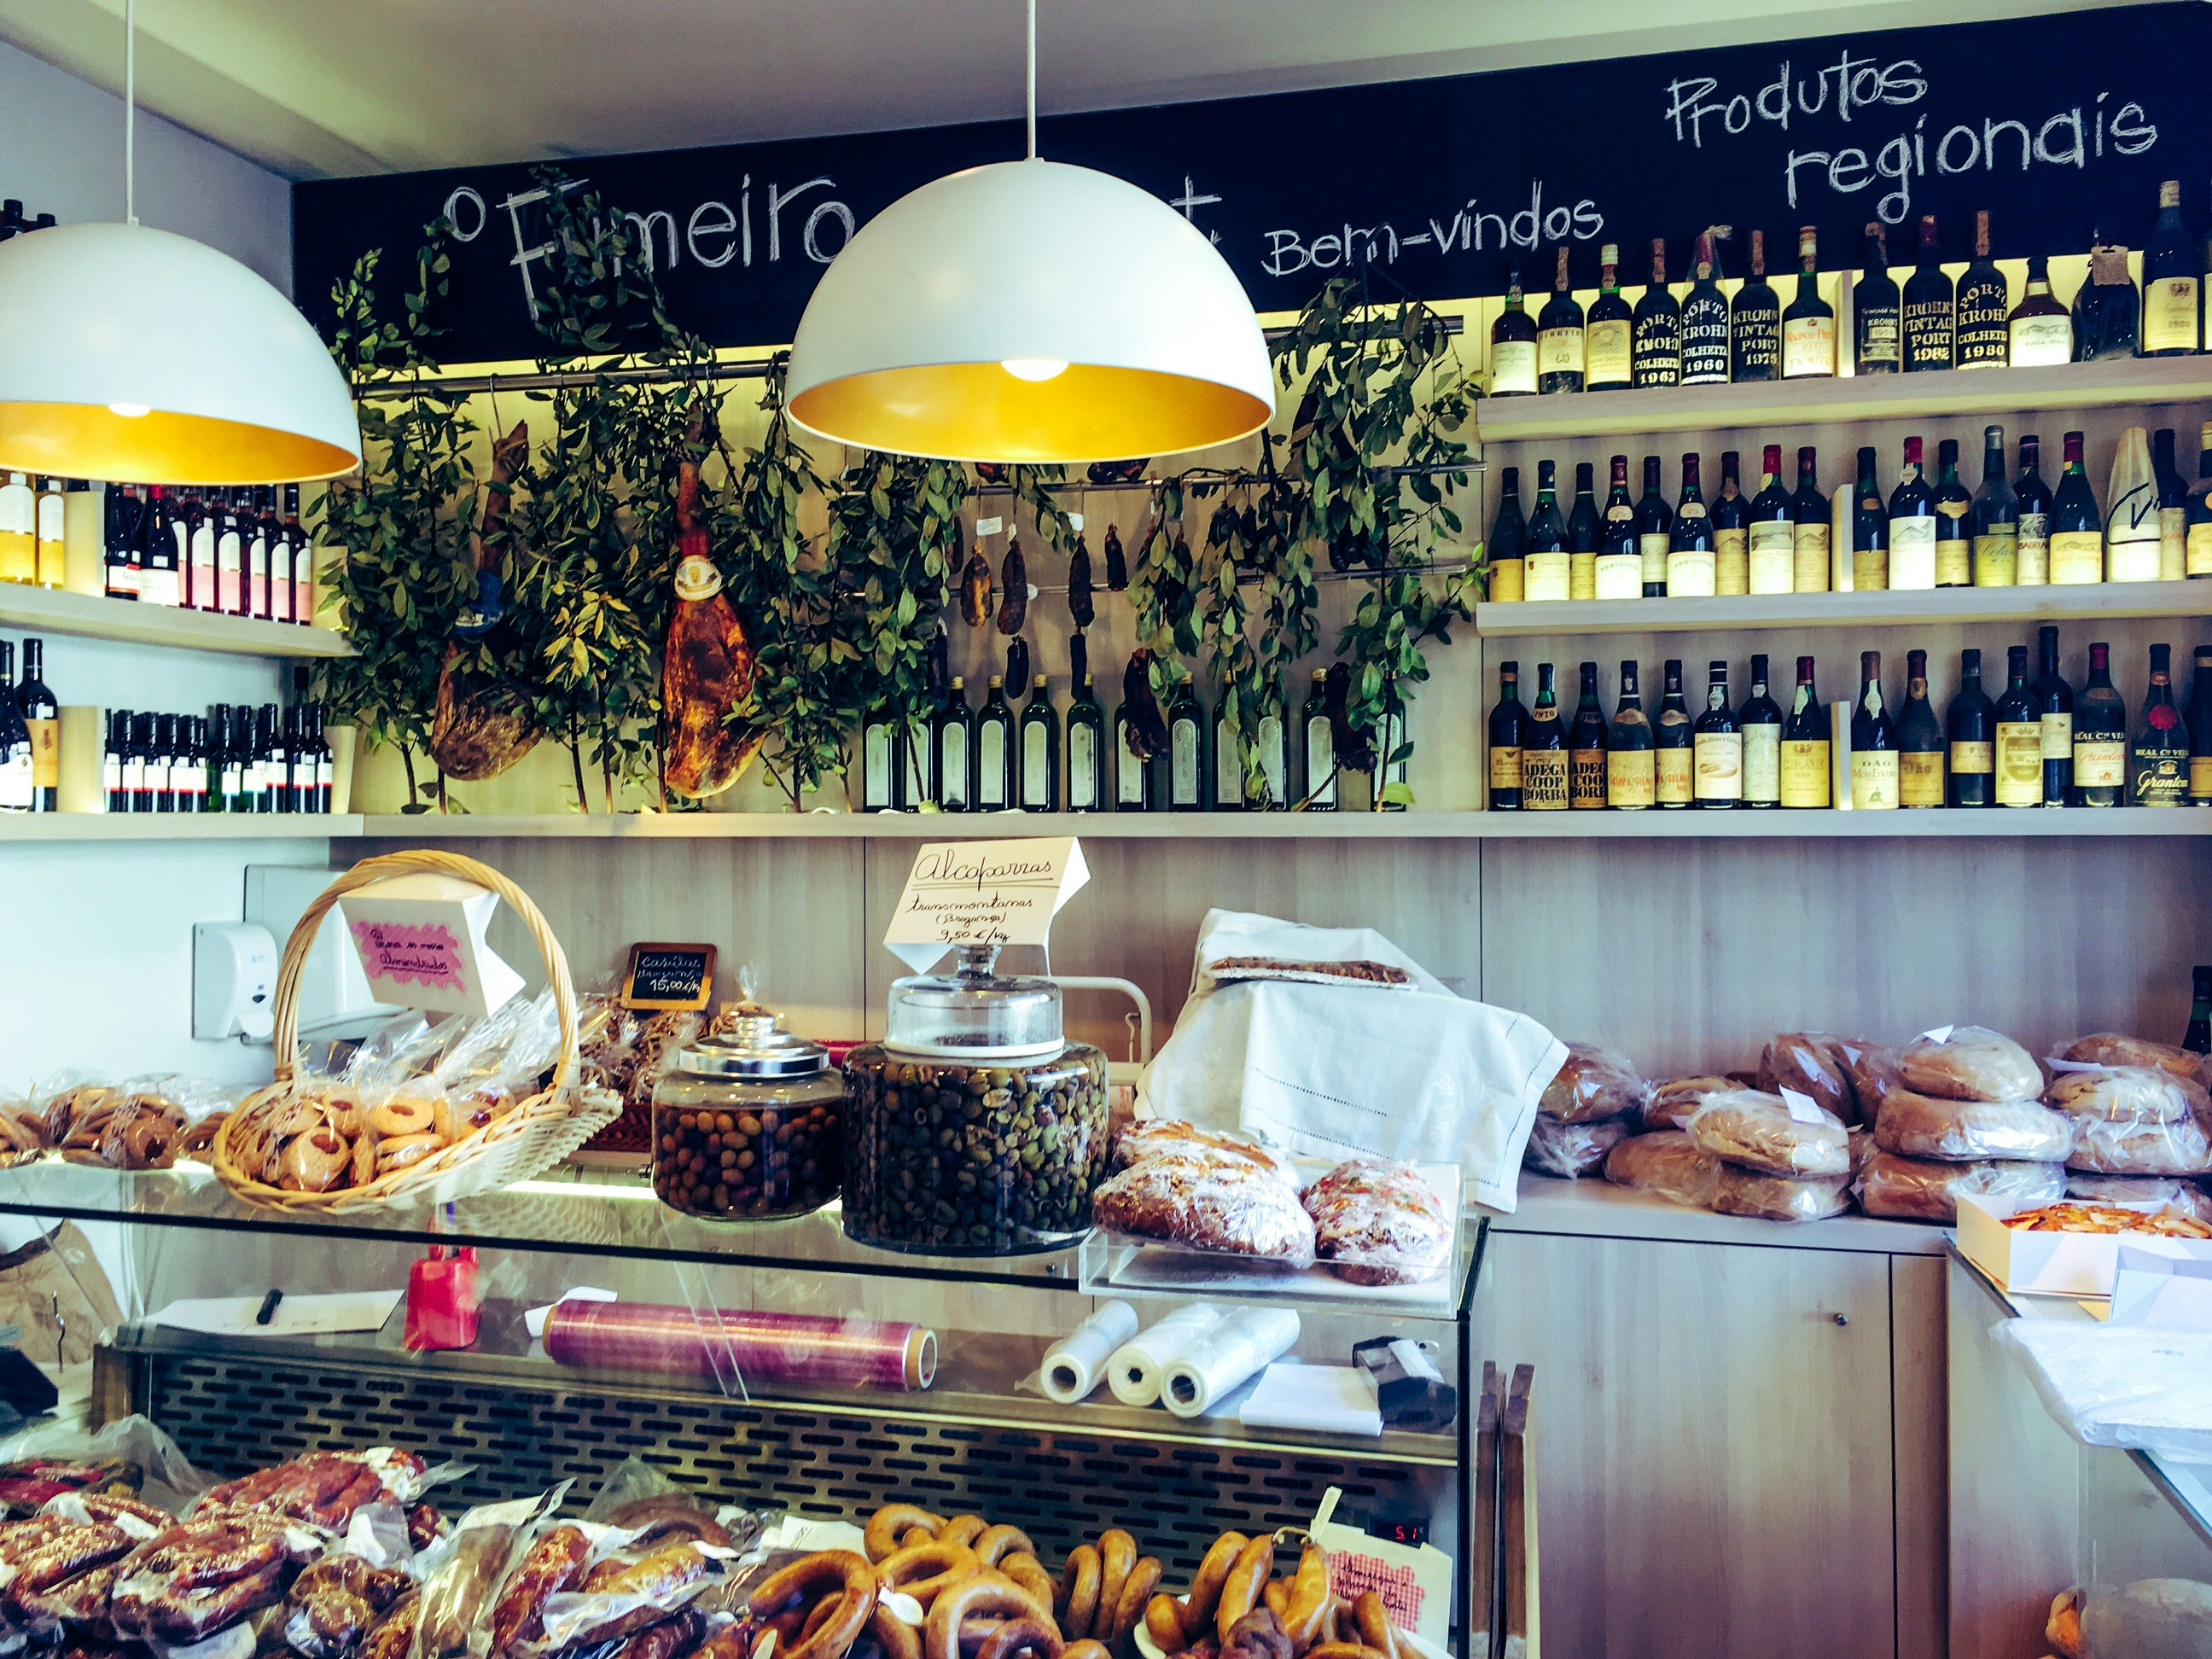 A glass display counter is filled with baked goods and topped with jars and baskets of pastries and olives, while the wall behind is lined with bottles of oil, vinegar and wine.